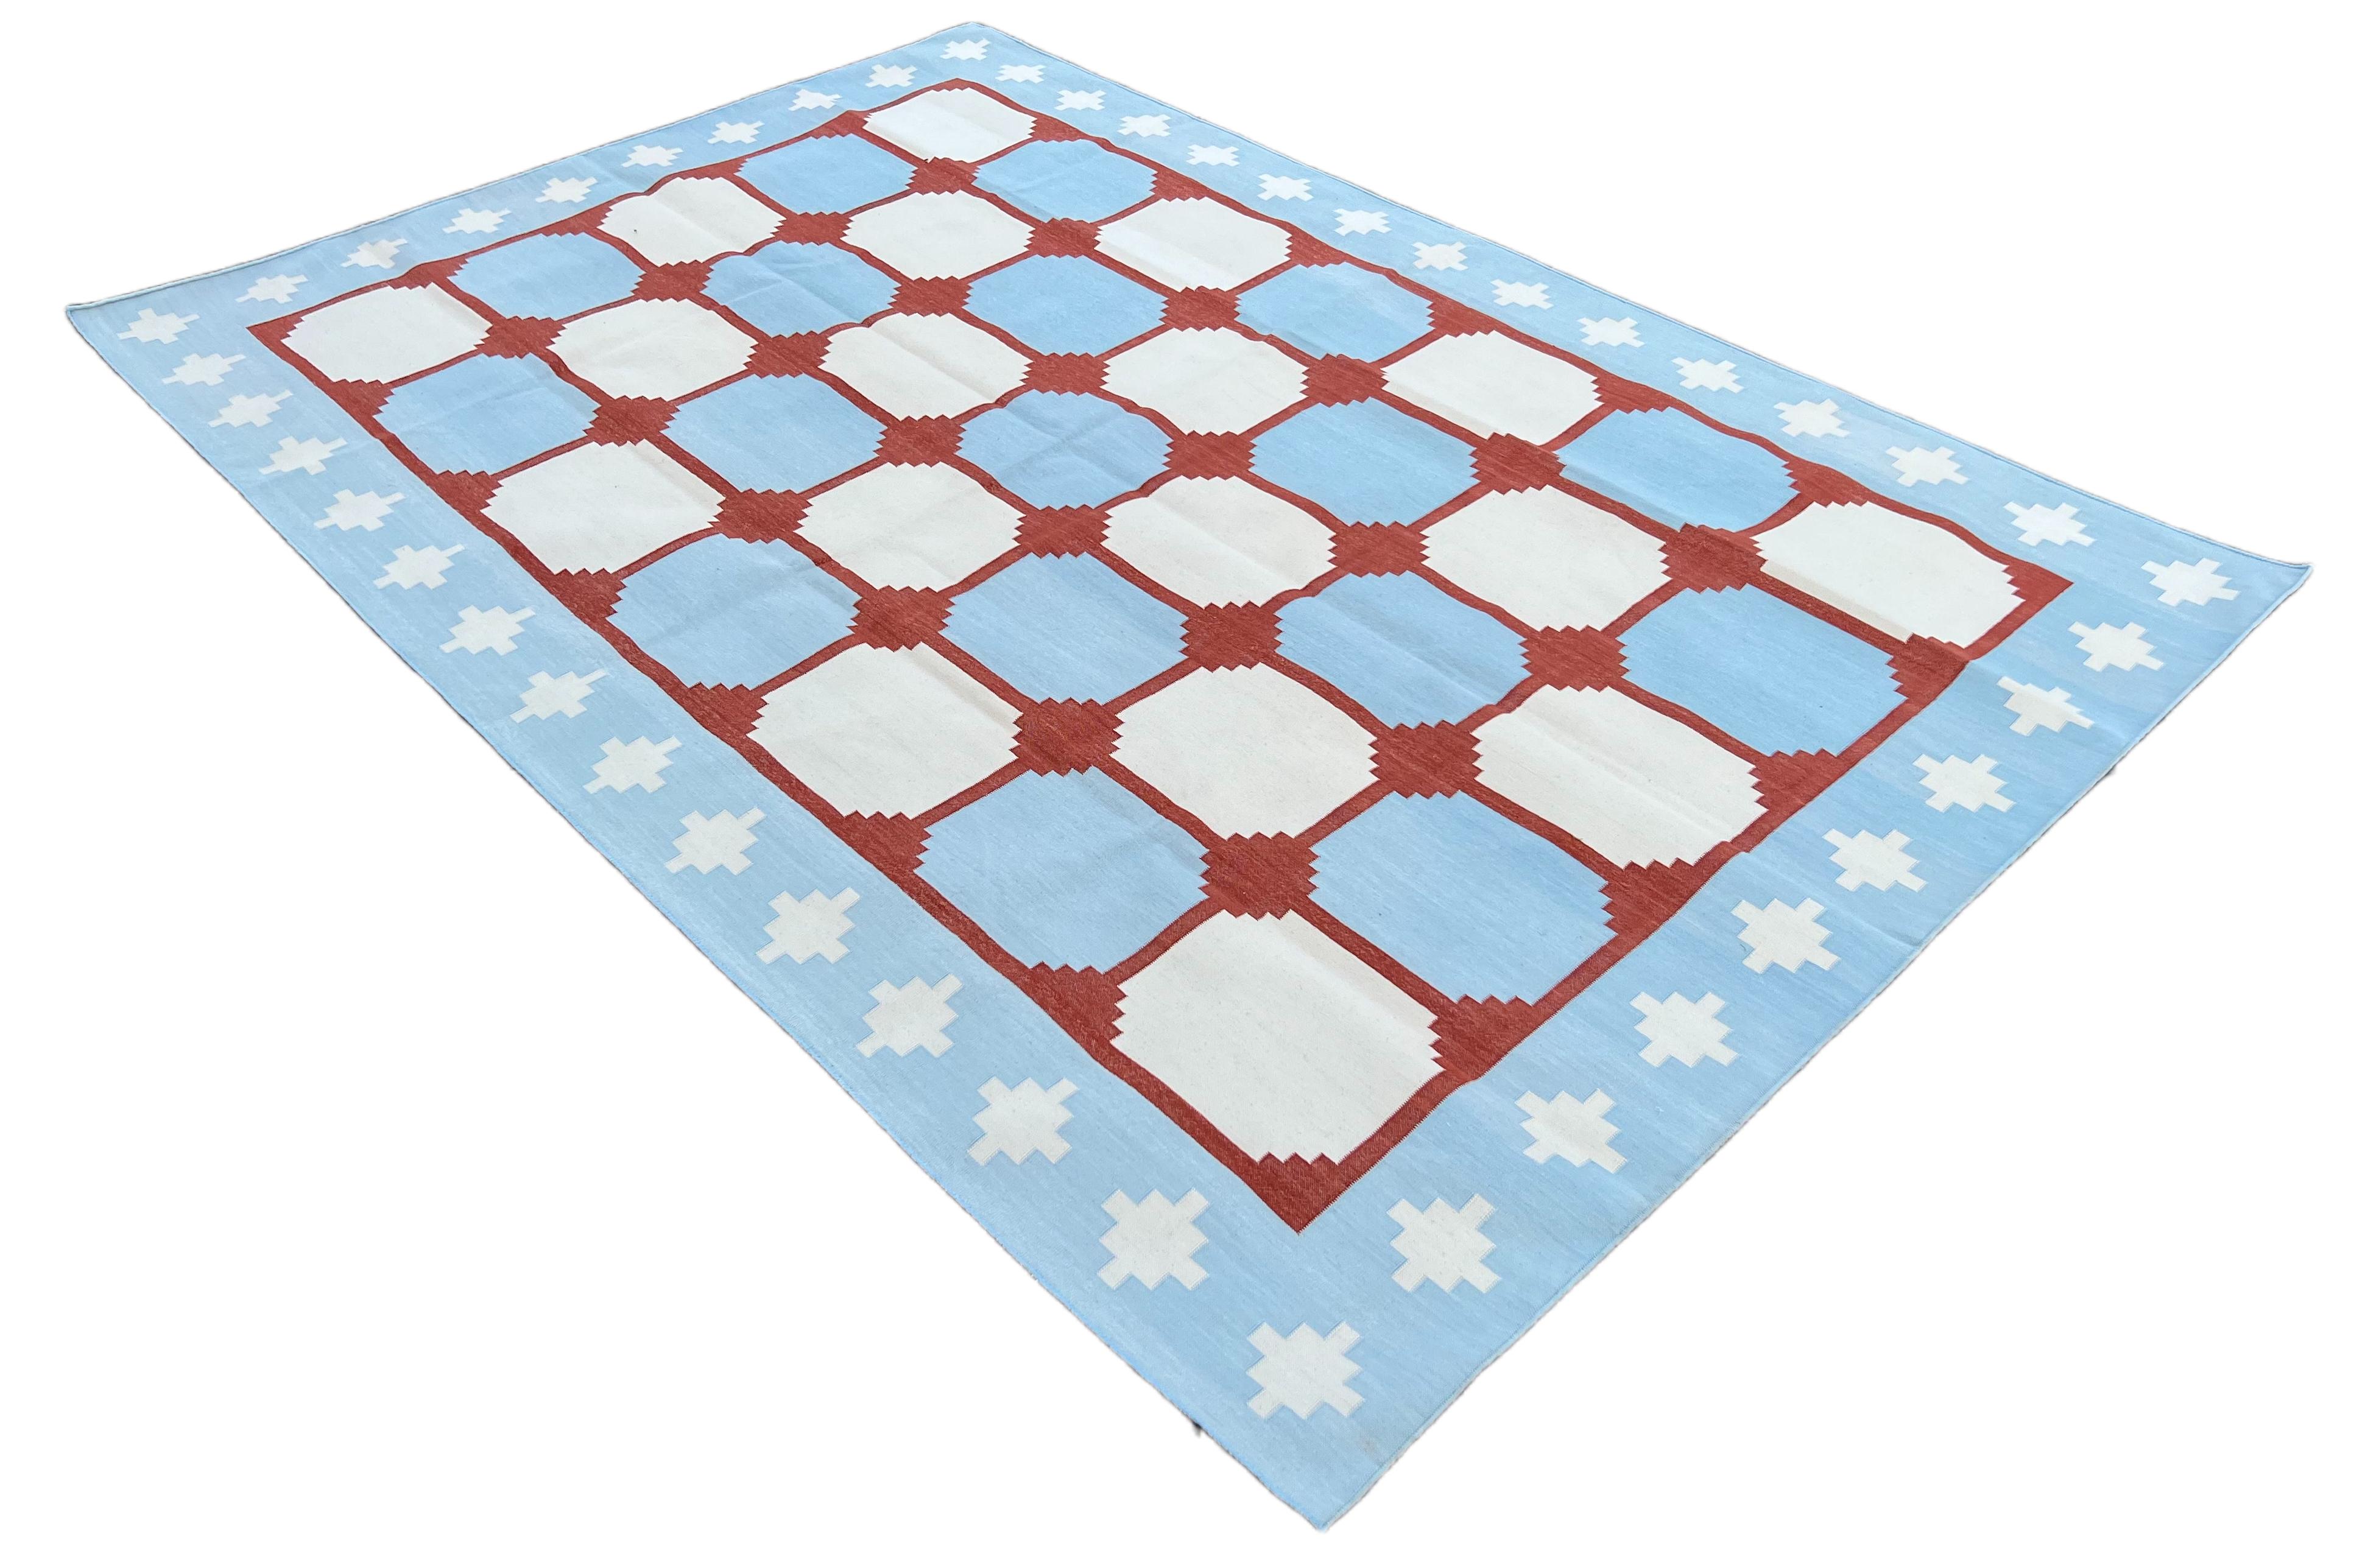 Cotton Vegetable Dyed Reversible Sky Blue And Red Indian Star Geometric Rug - 6'x9'
These special flat-weave dhurries are hand-woven with 15 ply 100% cotton yarn. Due to the special manufacturing techniques used to create our rugs, the size and